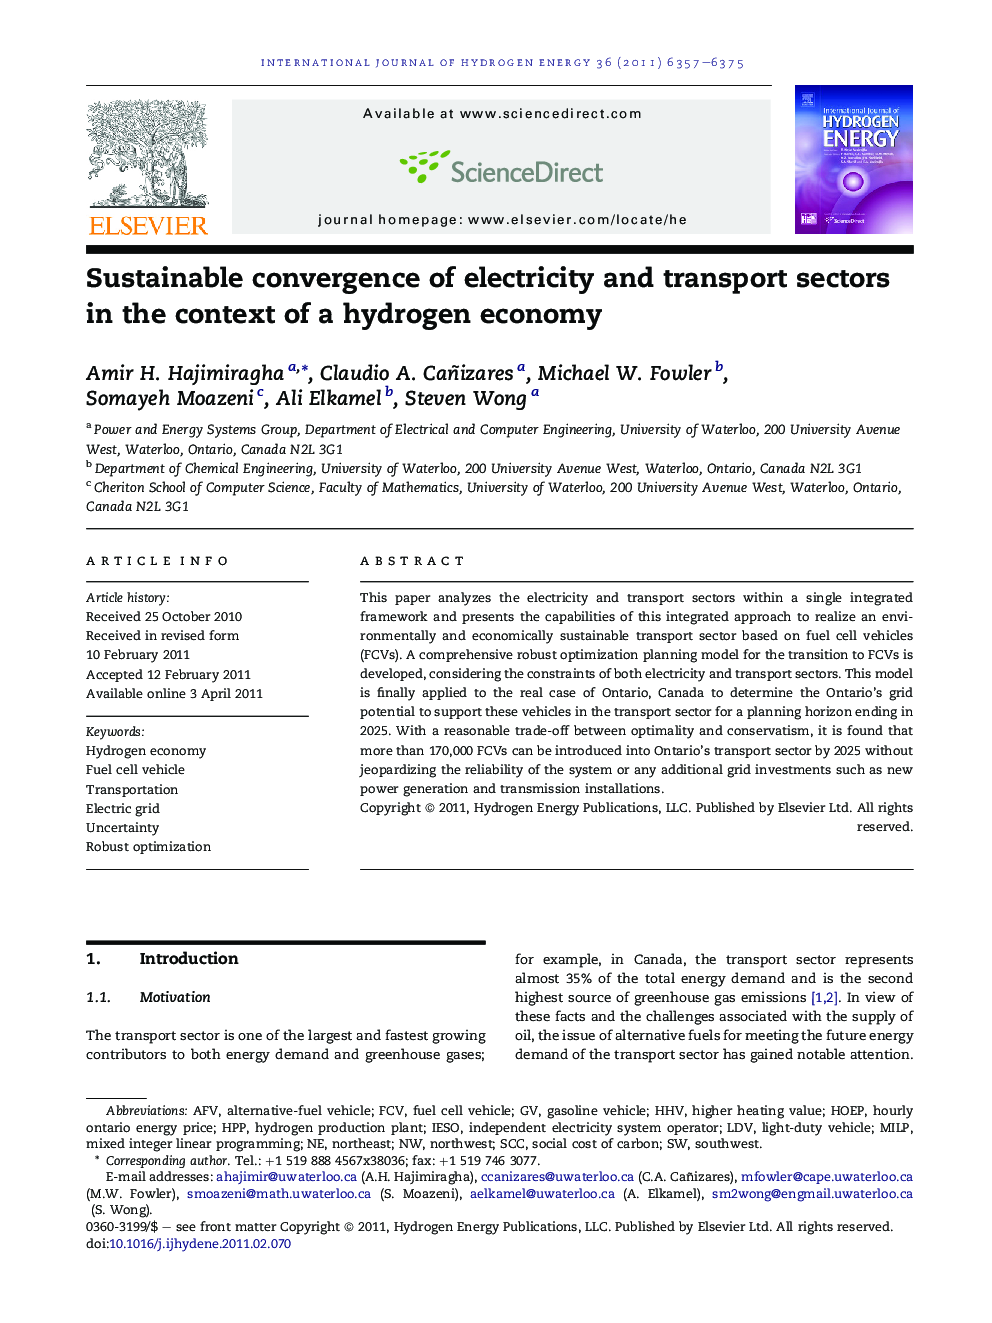 Sustainable convergence of electricity and transport sectors in the context of a hydrogen economy